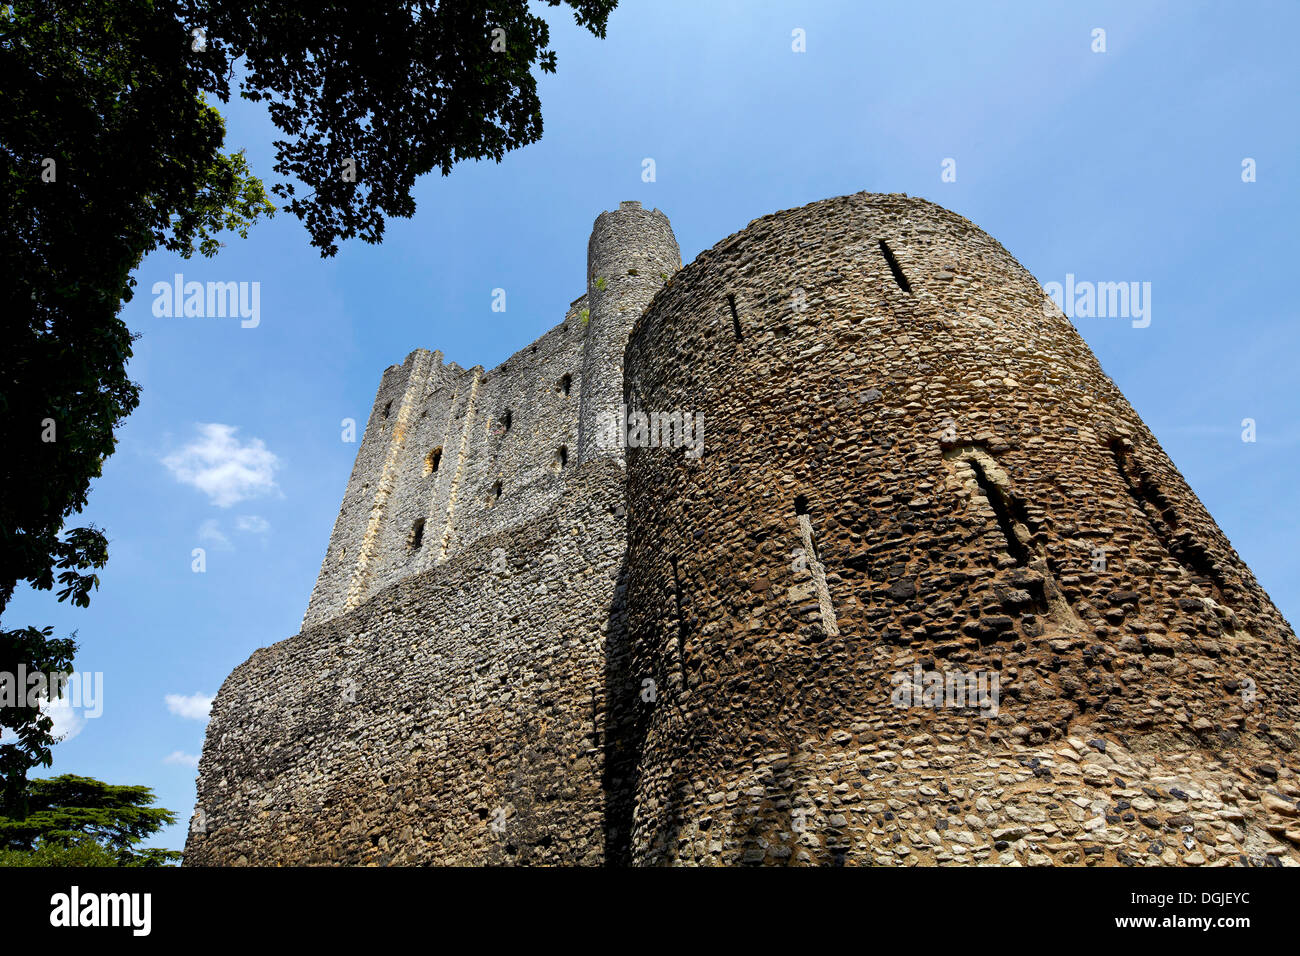 Rochester castle in Kent. Stock Photo